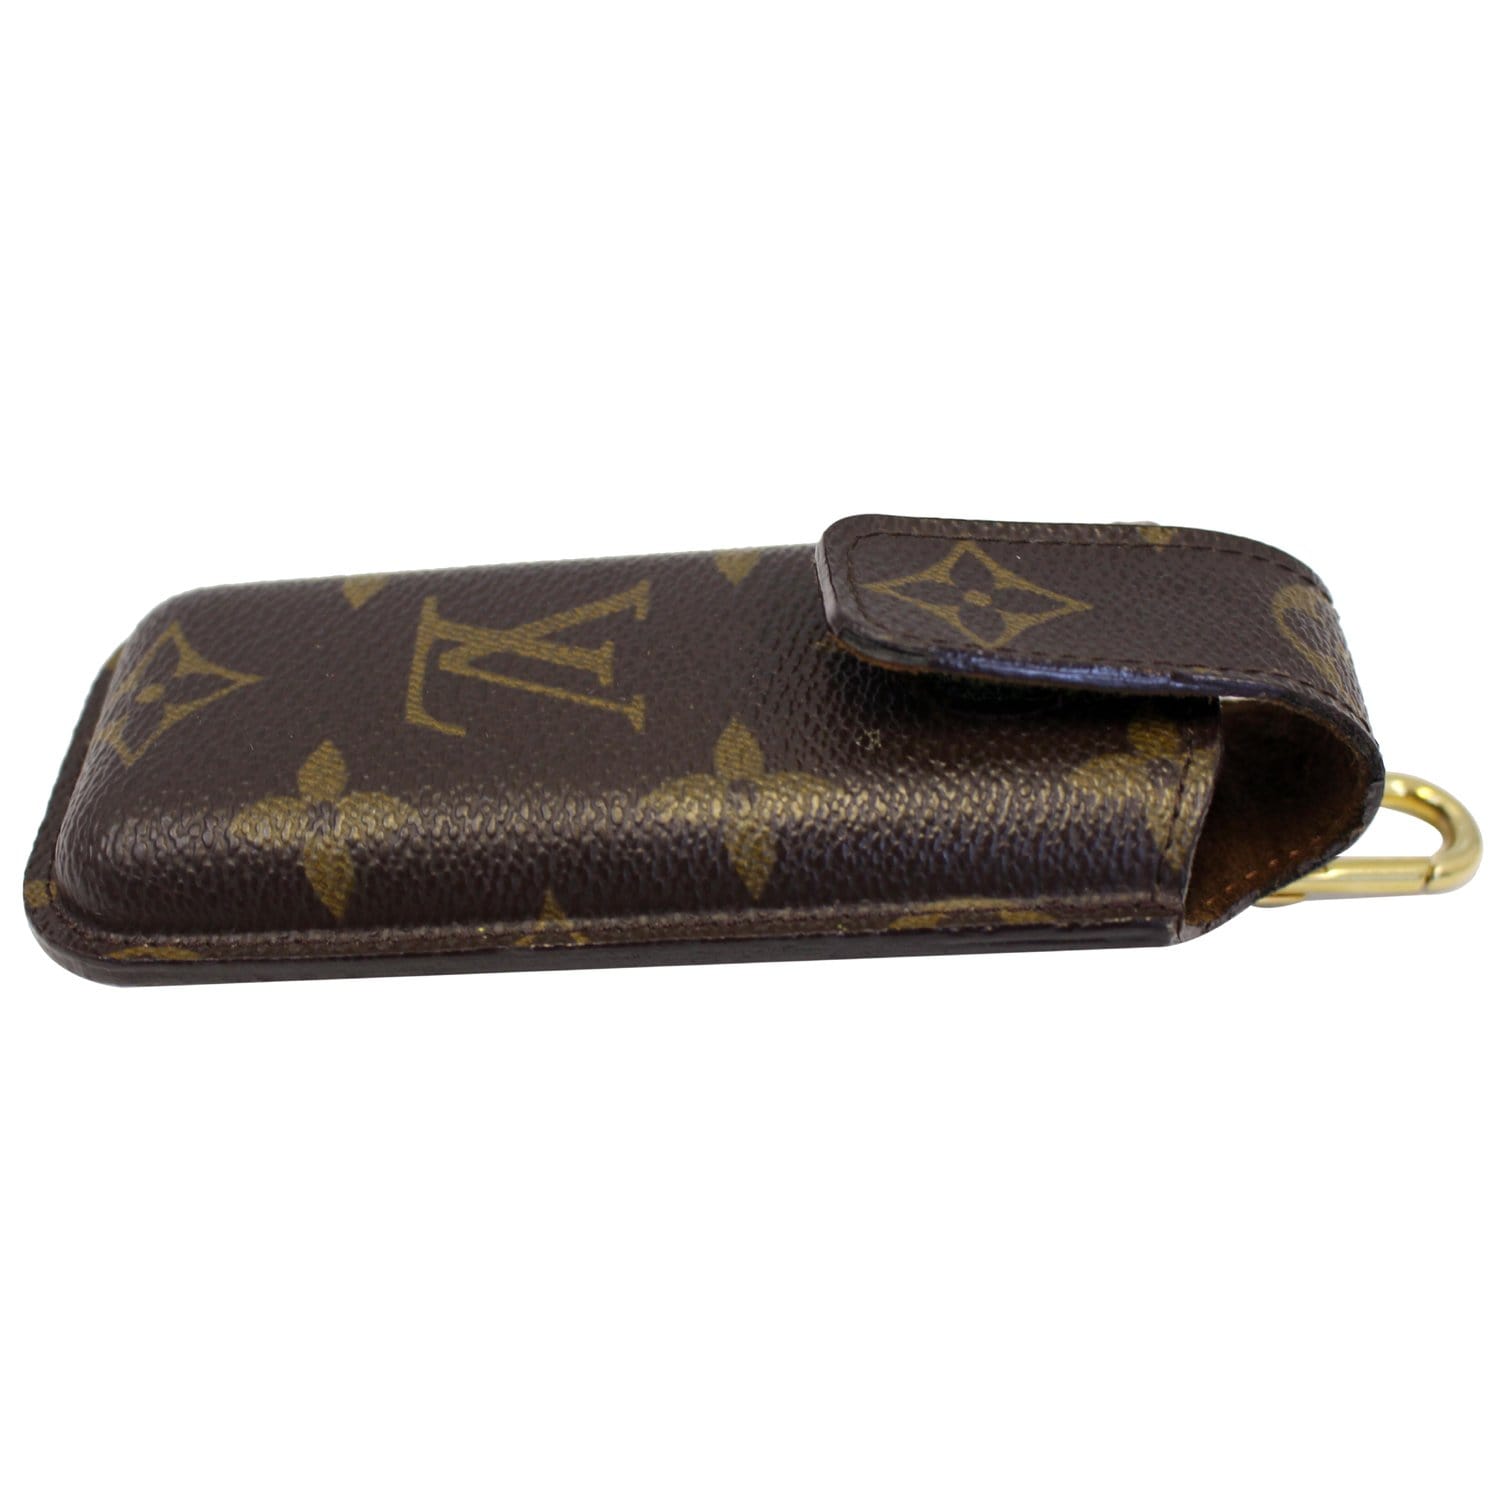 Louis Vuitton Phone Case Price In Indiana